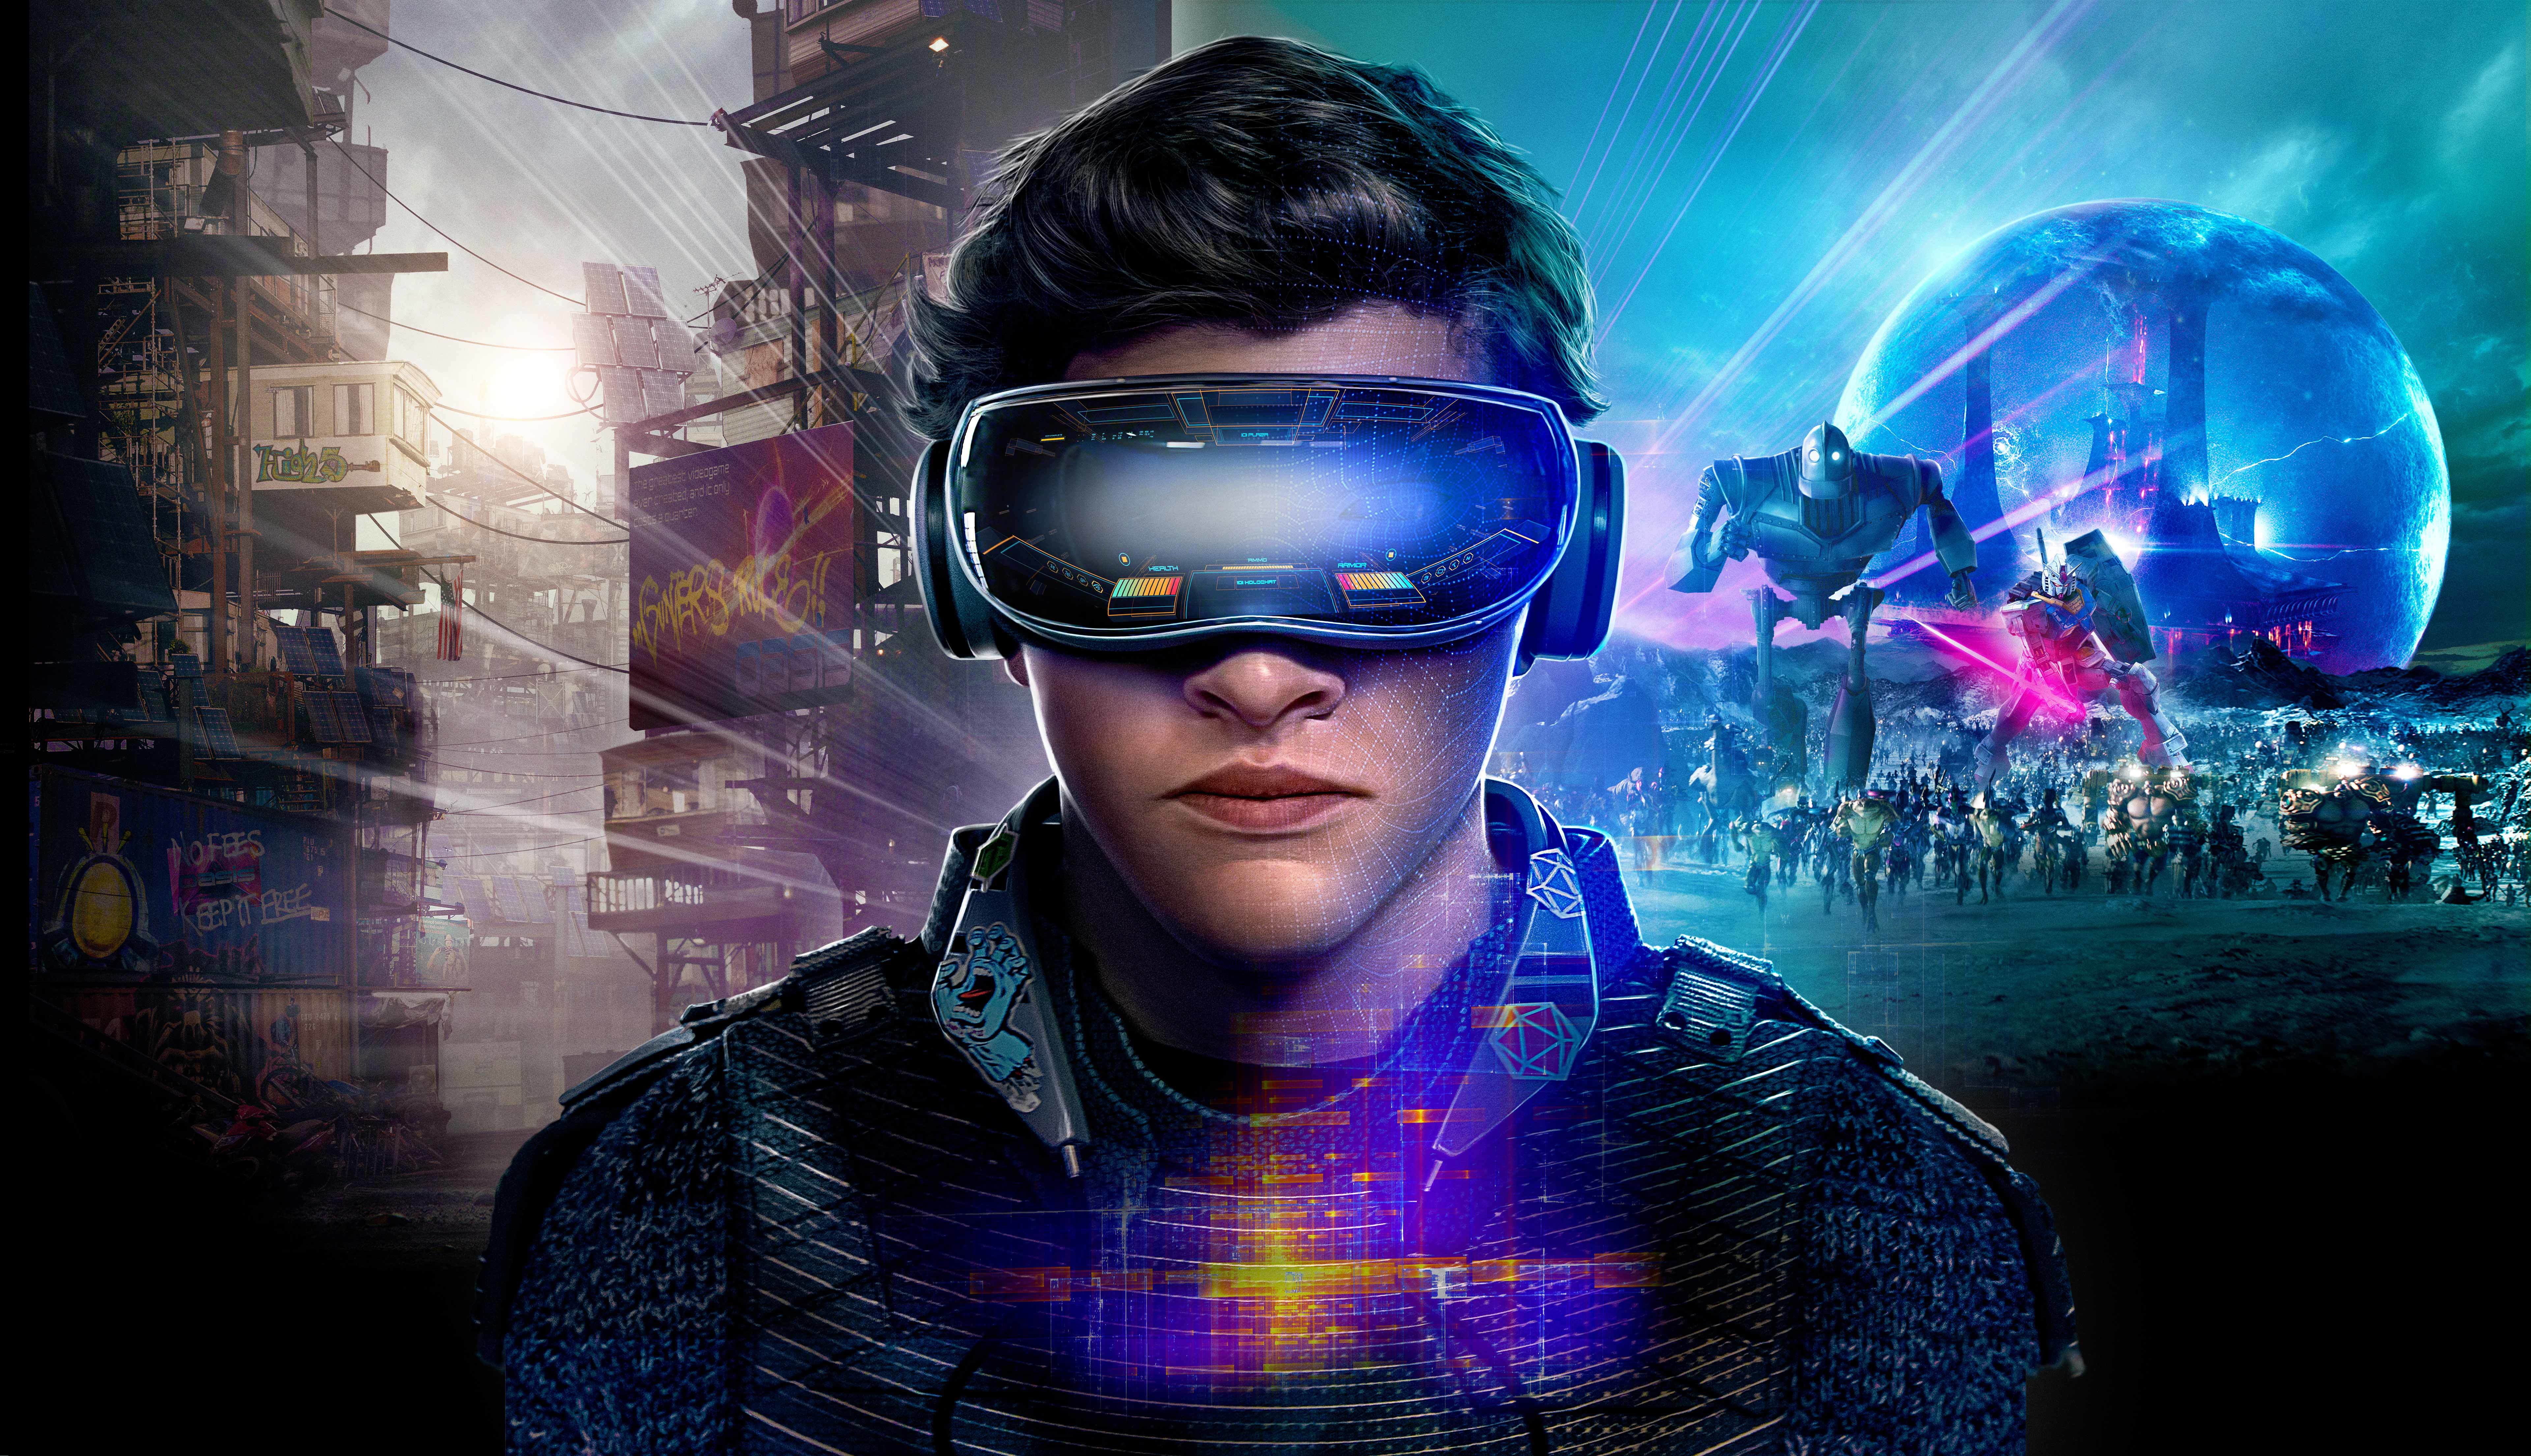 Ready Player One International Poster Wallpaper, HD Movies 4K